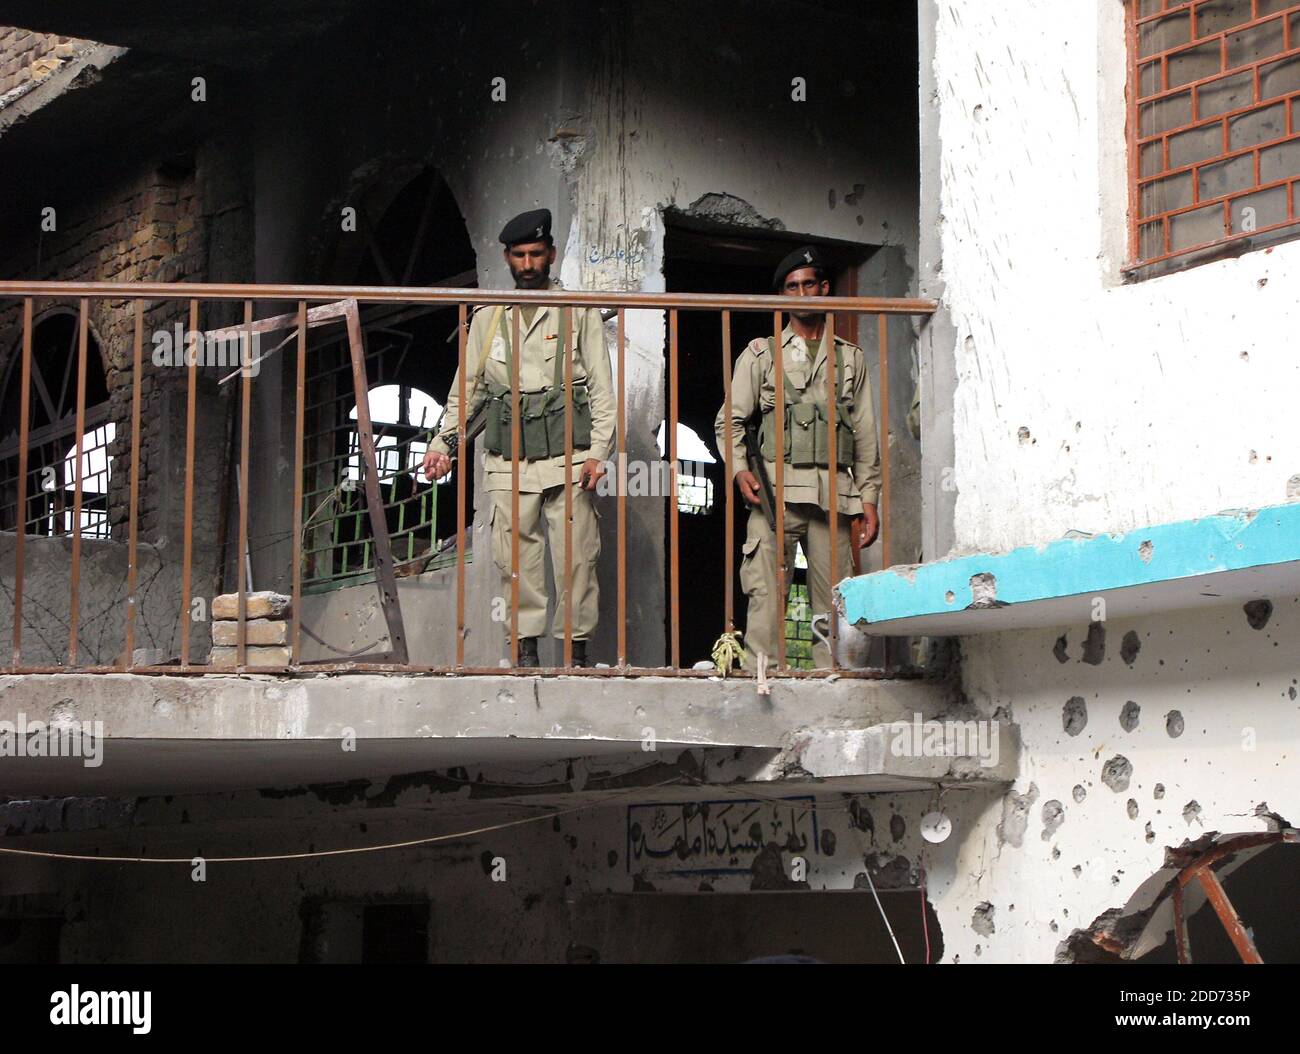 NO FILM, NO VIDEO, NO TV, NO DOCUMENTARY - Pakistani soldiers at Lal Masjid, the Red Mosque, in Islamabad, Pakistan, in the aftermath of heavy fighting this week, July 12, 2007. Photo by Tom Lasseter/MCT/ABACAPRESS.COM Stock Photo